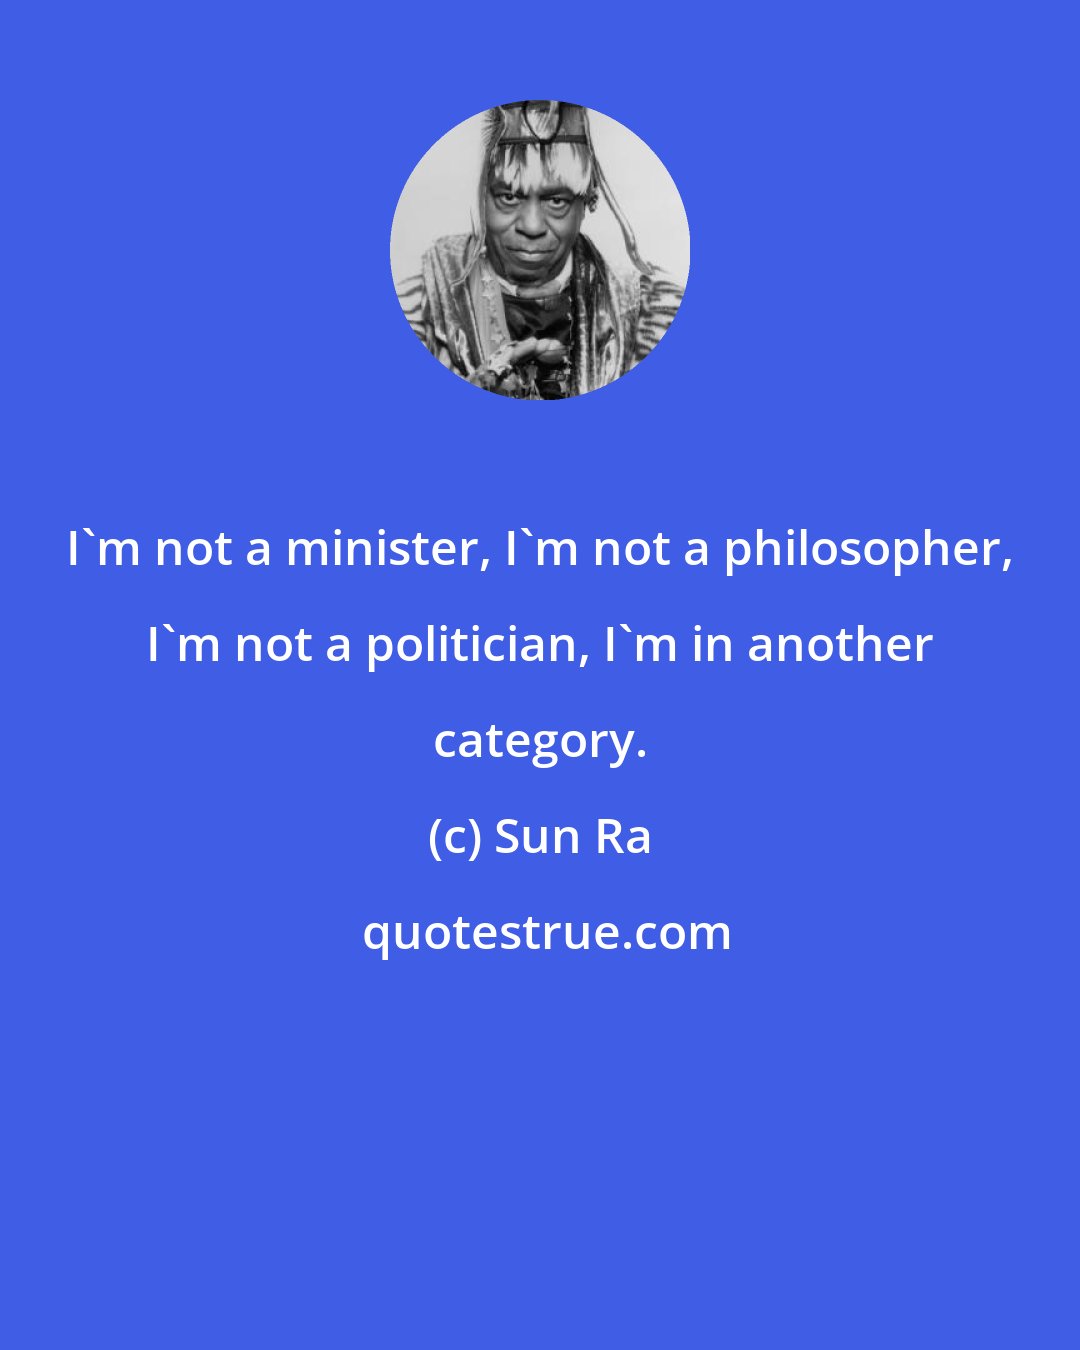 Sun Ra: I'm not a minister, I'm not a philosopher, I'm not a politician, I'm in another category.